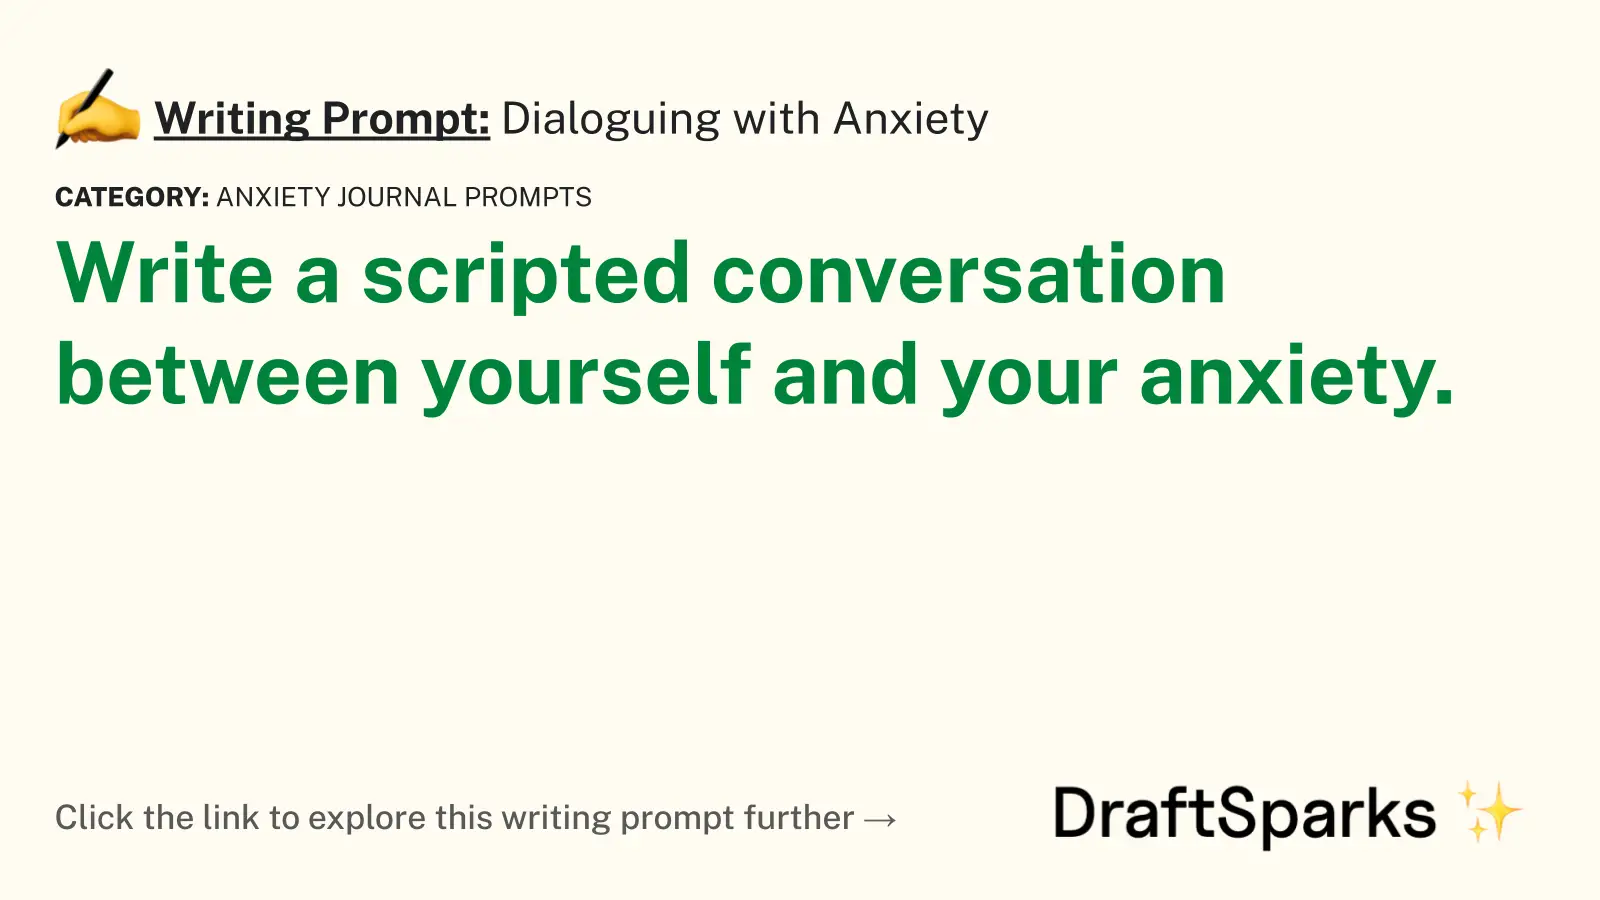 Dialoguing with Anxiety